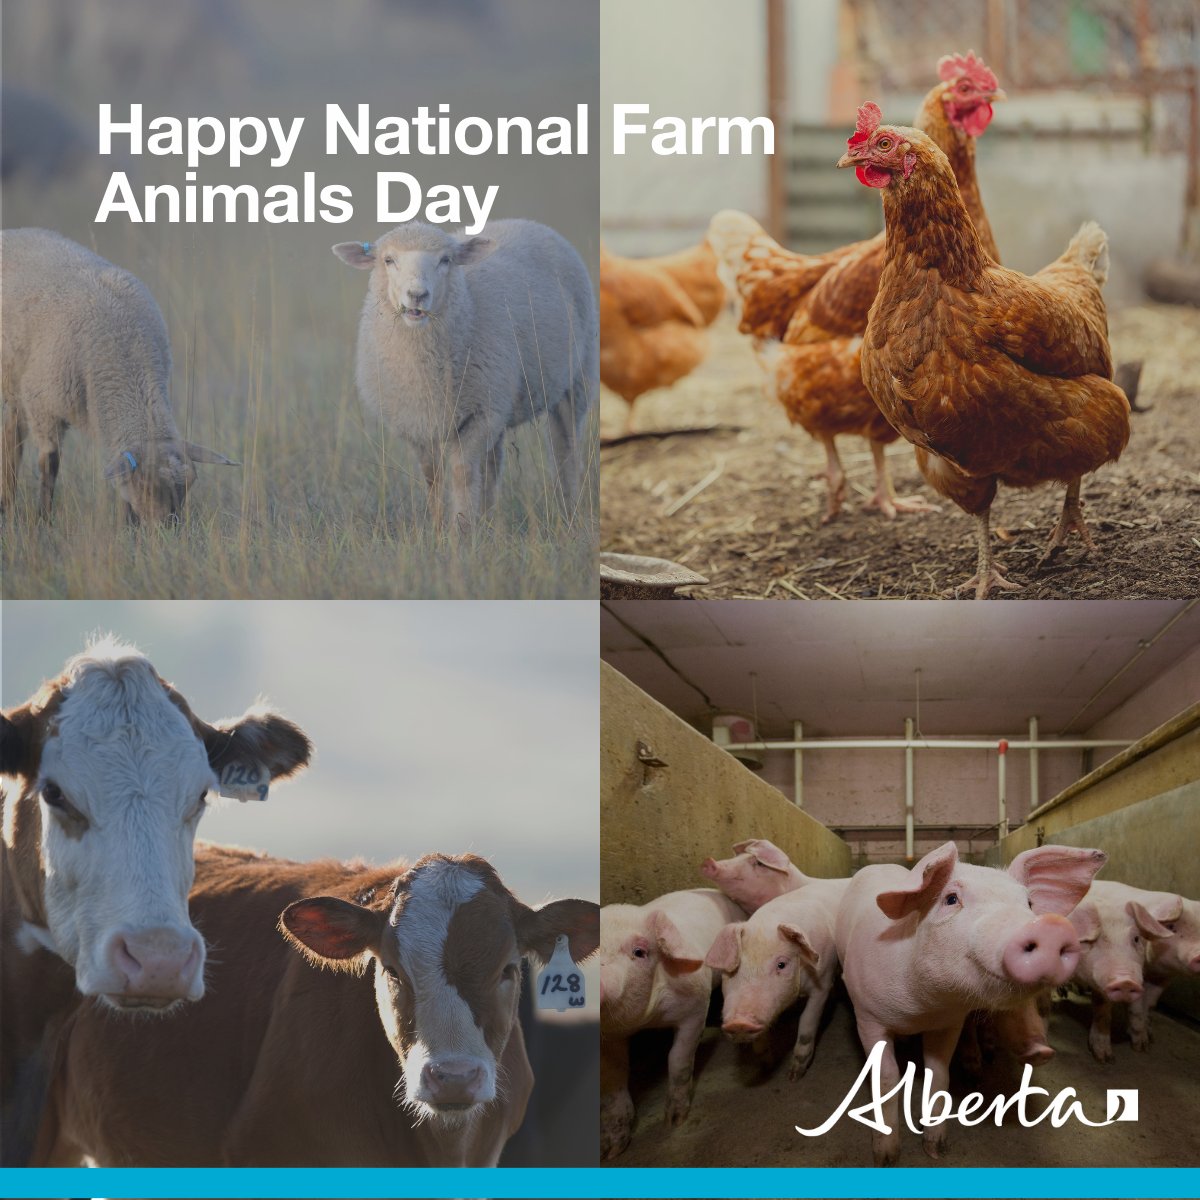 They’re a key part of Alberta’s agriculture industry by providing us with meat, eggs, milk, cheese, wool, leather and many other products. Happy National Farm Animals Day! #abag